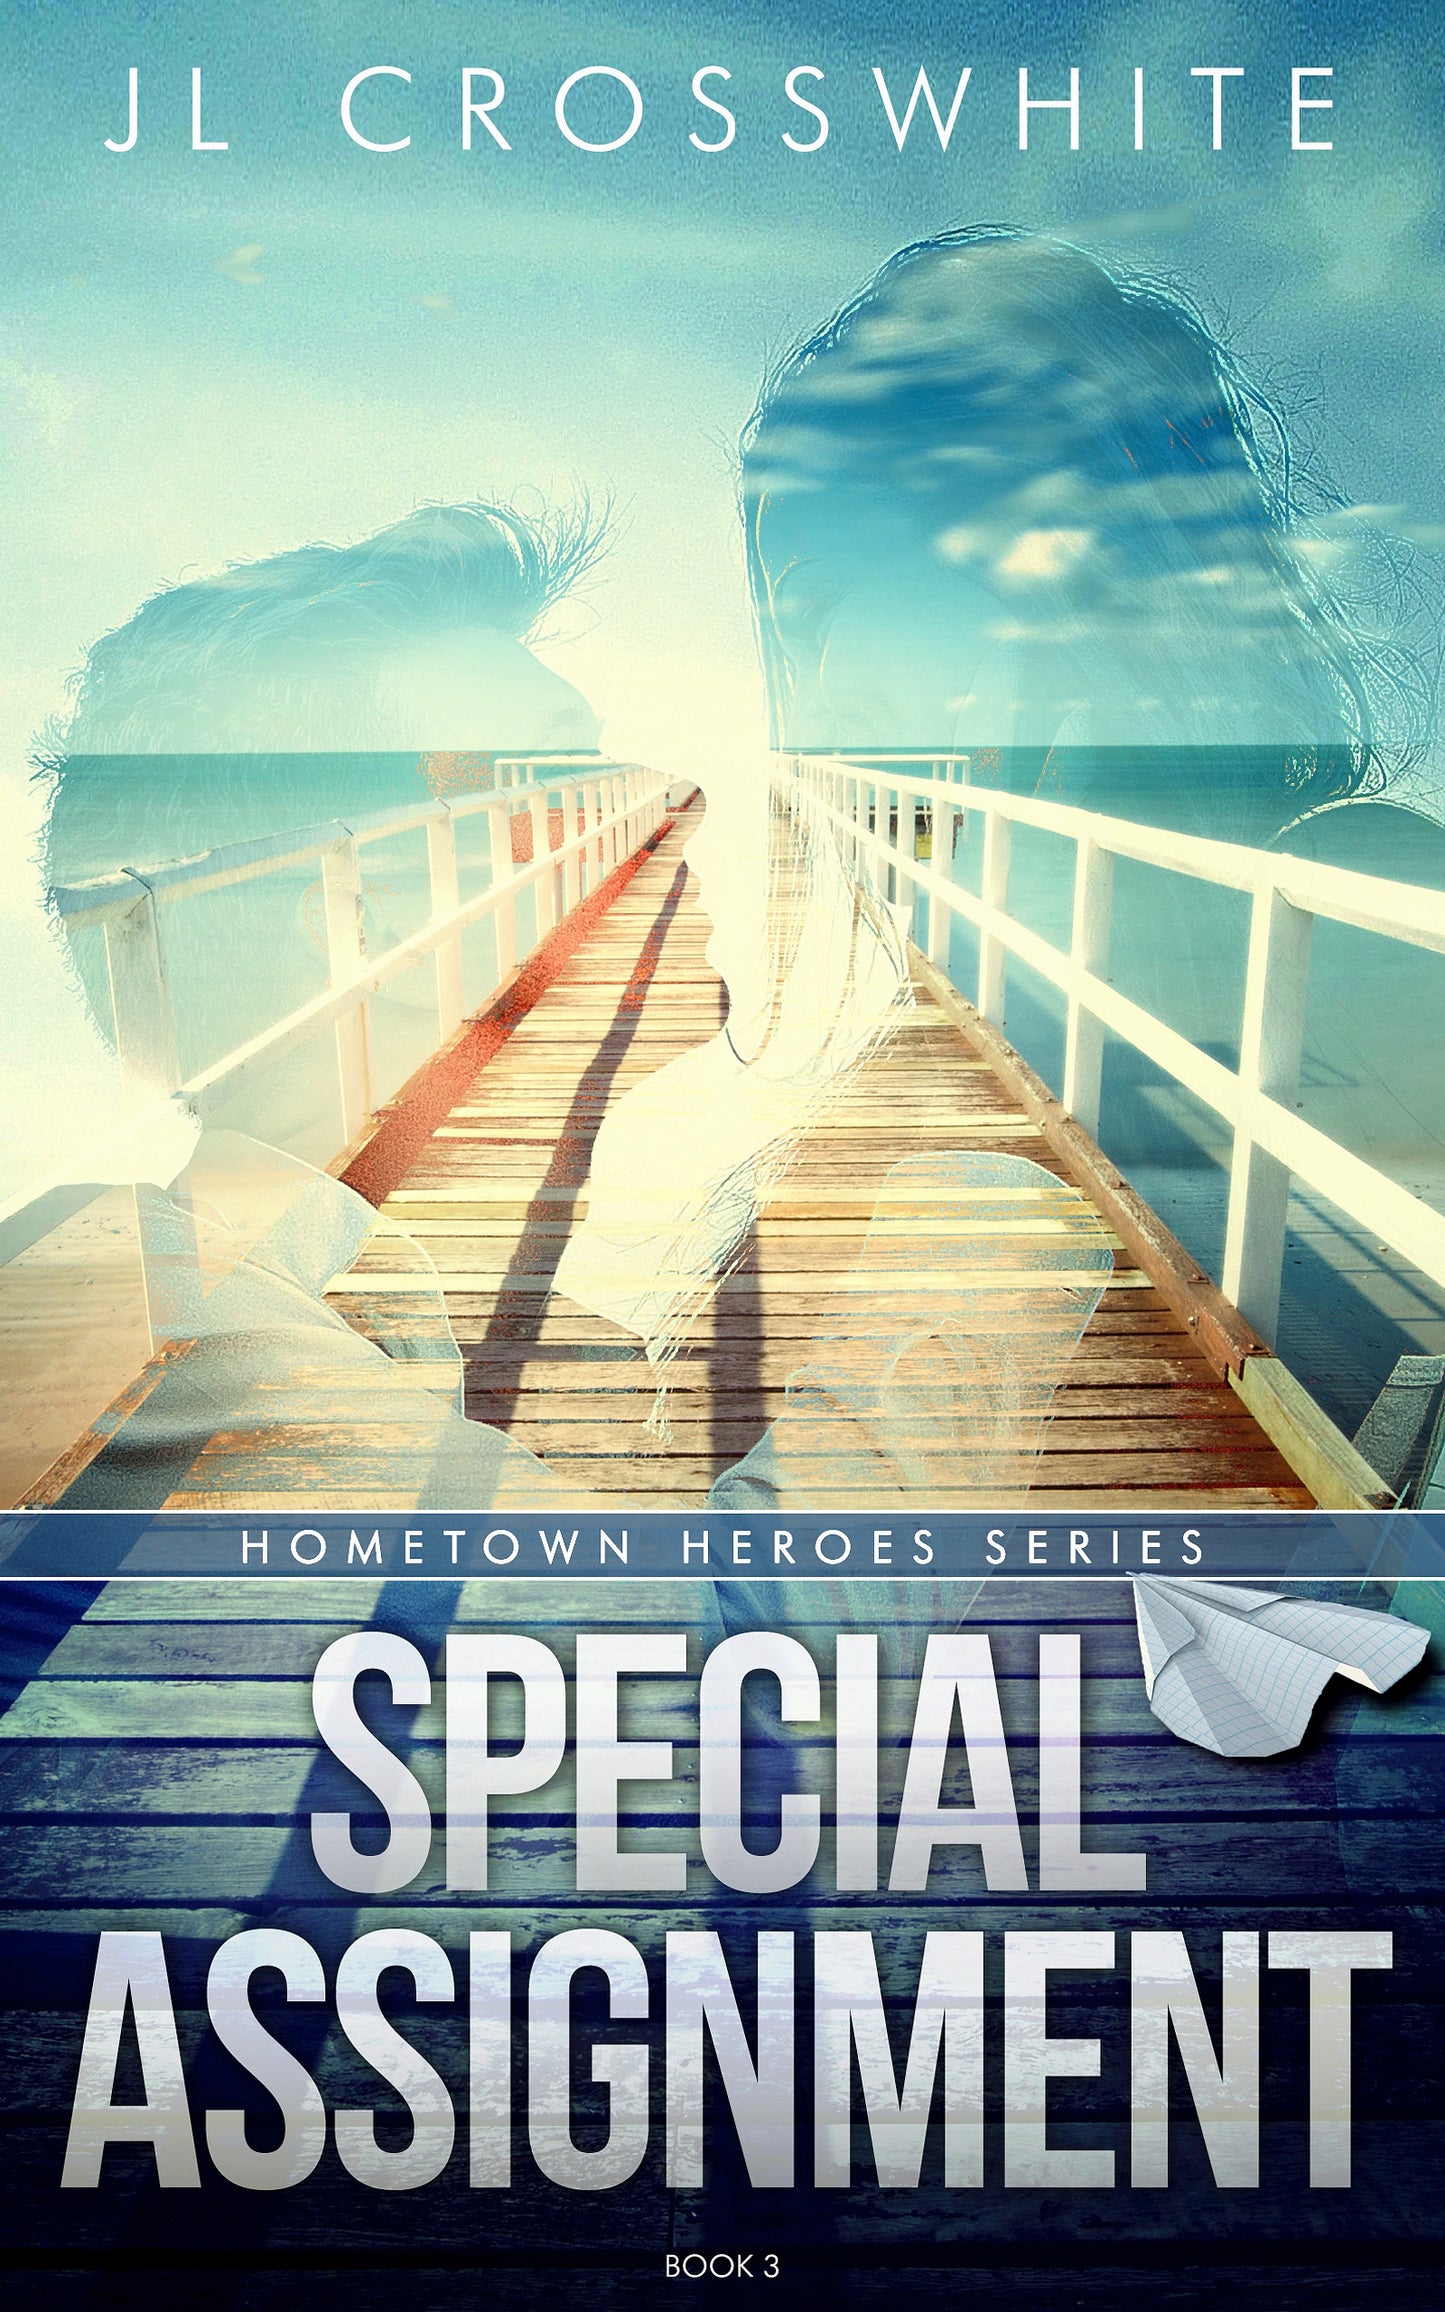 Special Assignment: Hometown Heroes book 3